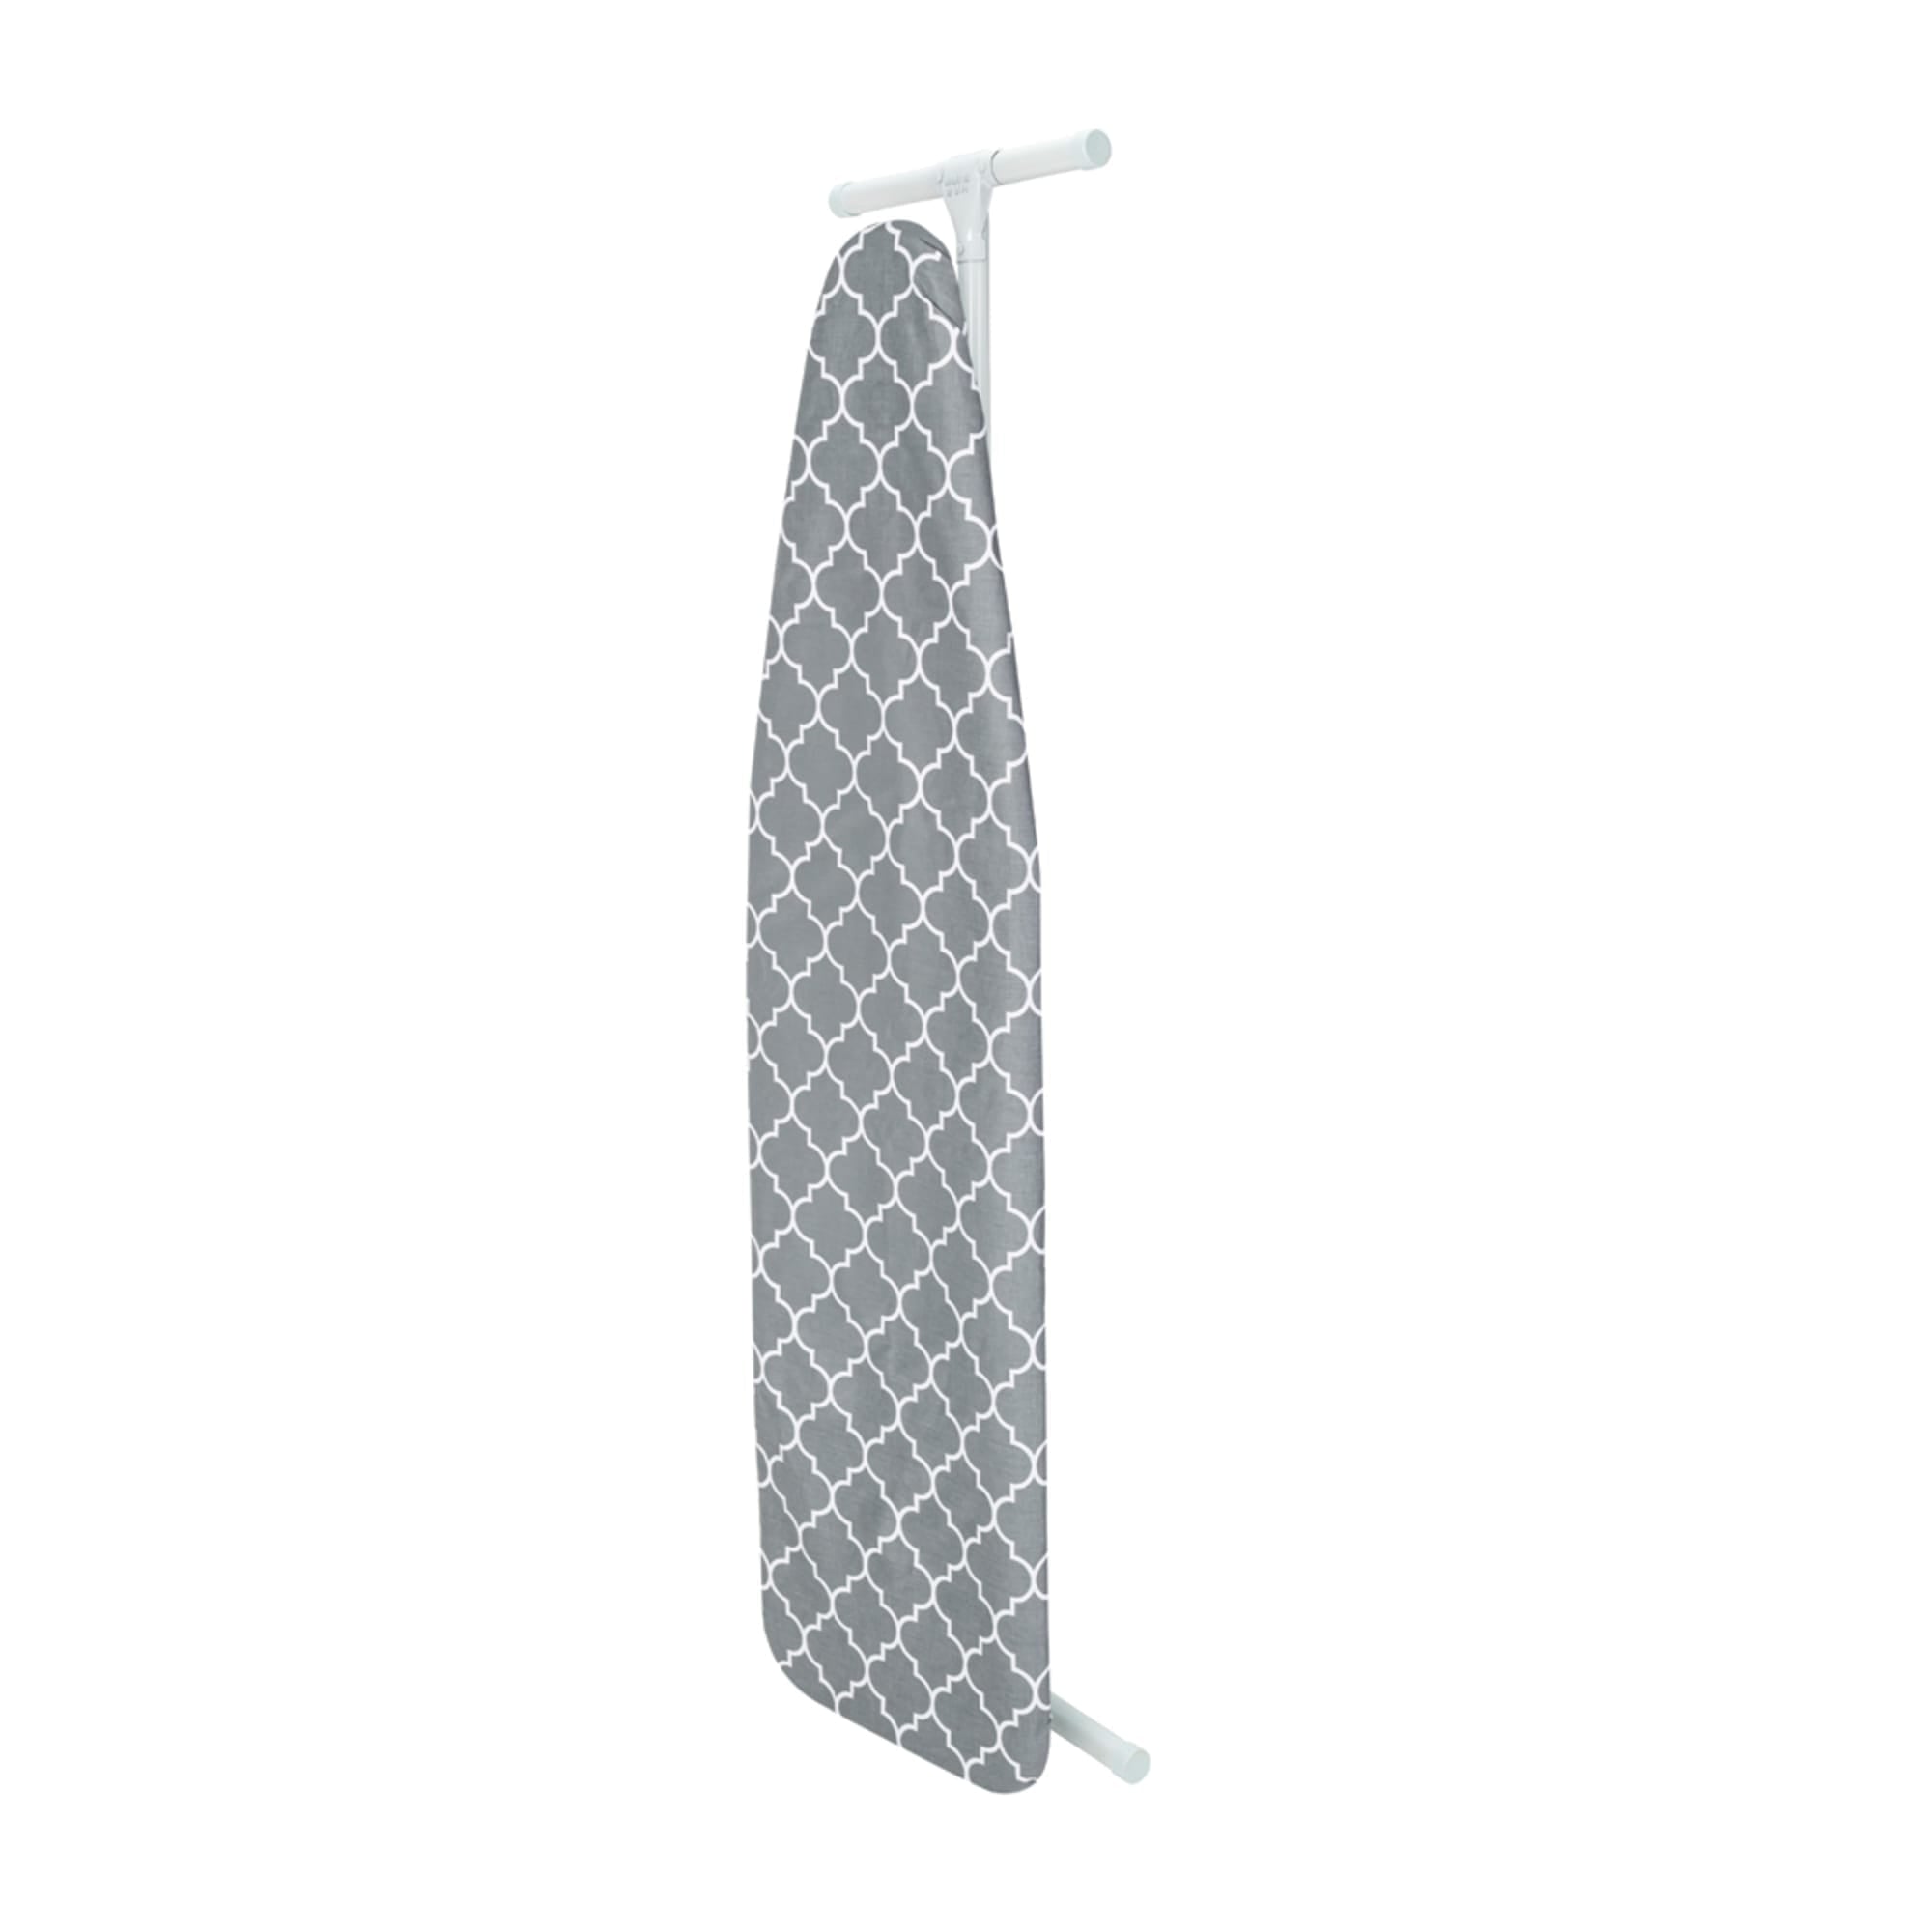 Seymour Home Products Gray Freestanding Folding Ironing Board (53-in x 14-in x 35-in) Cotton | 8141776